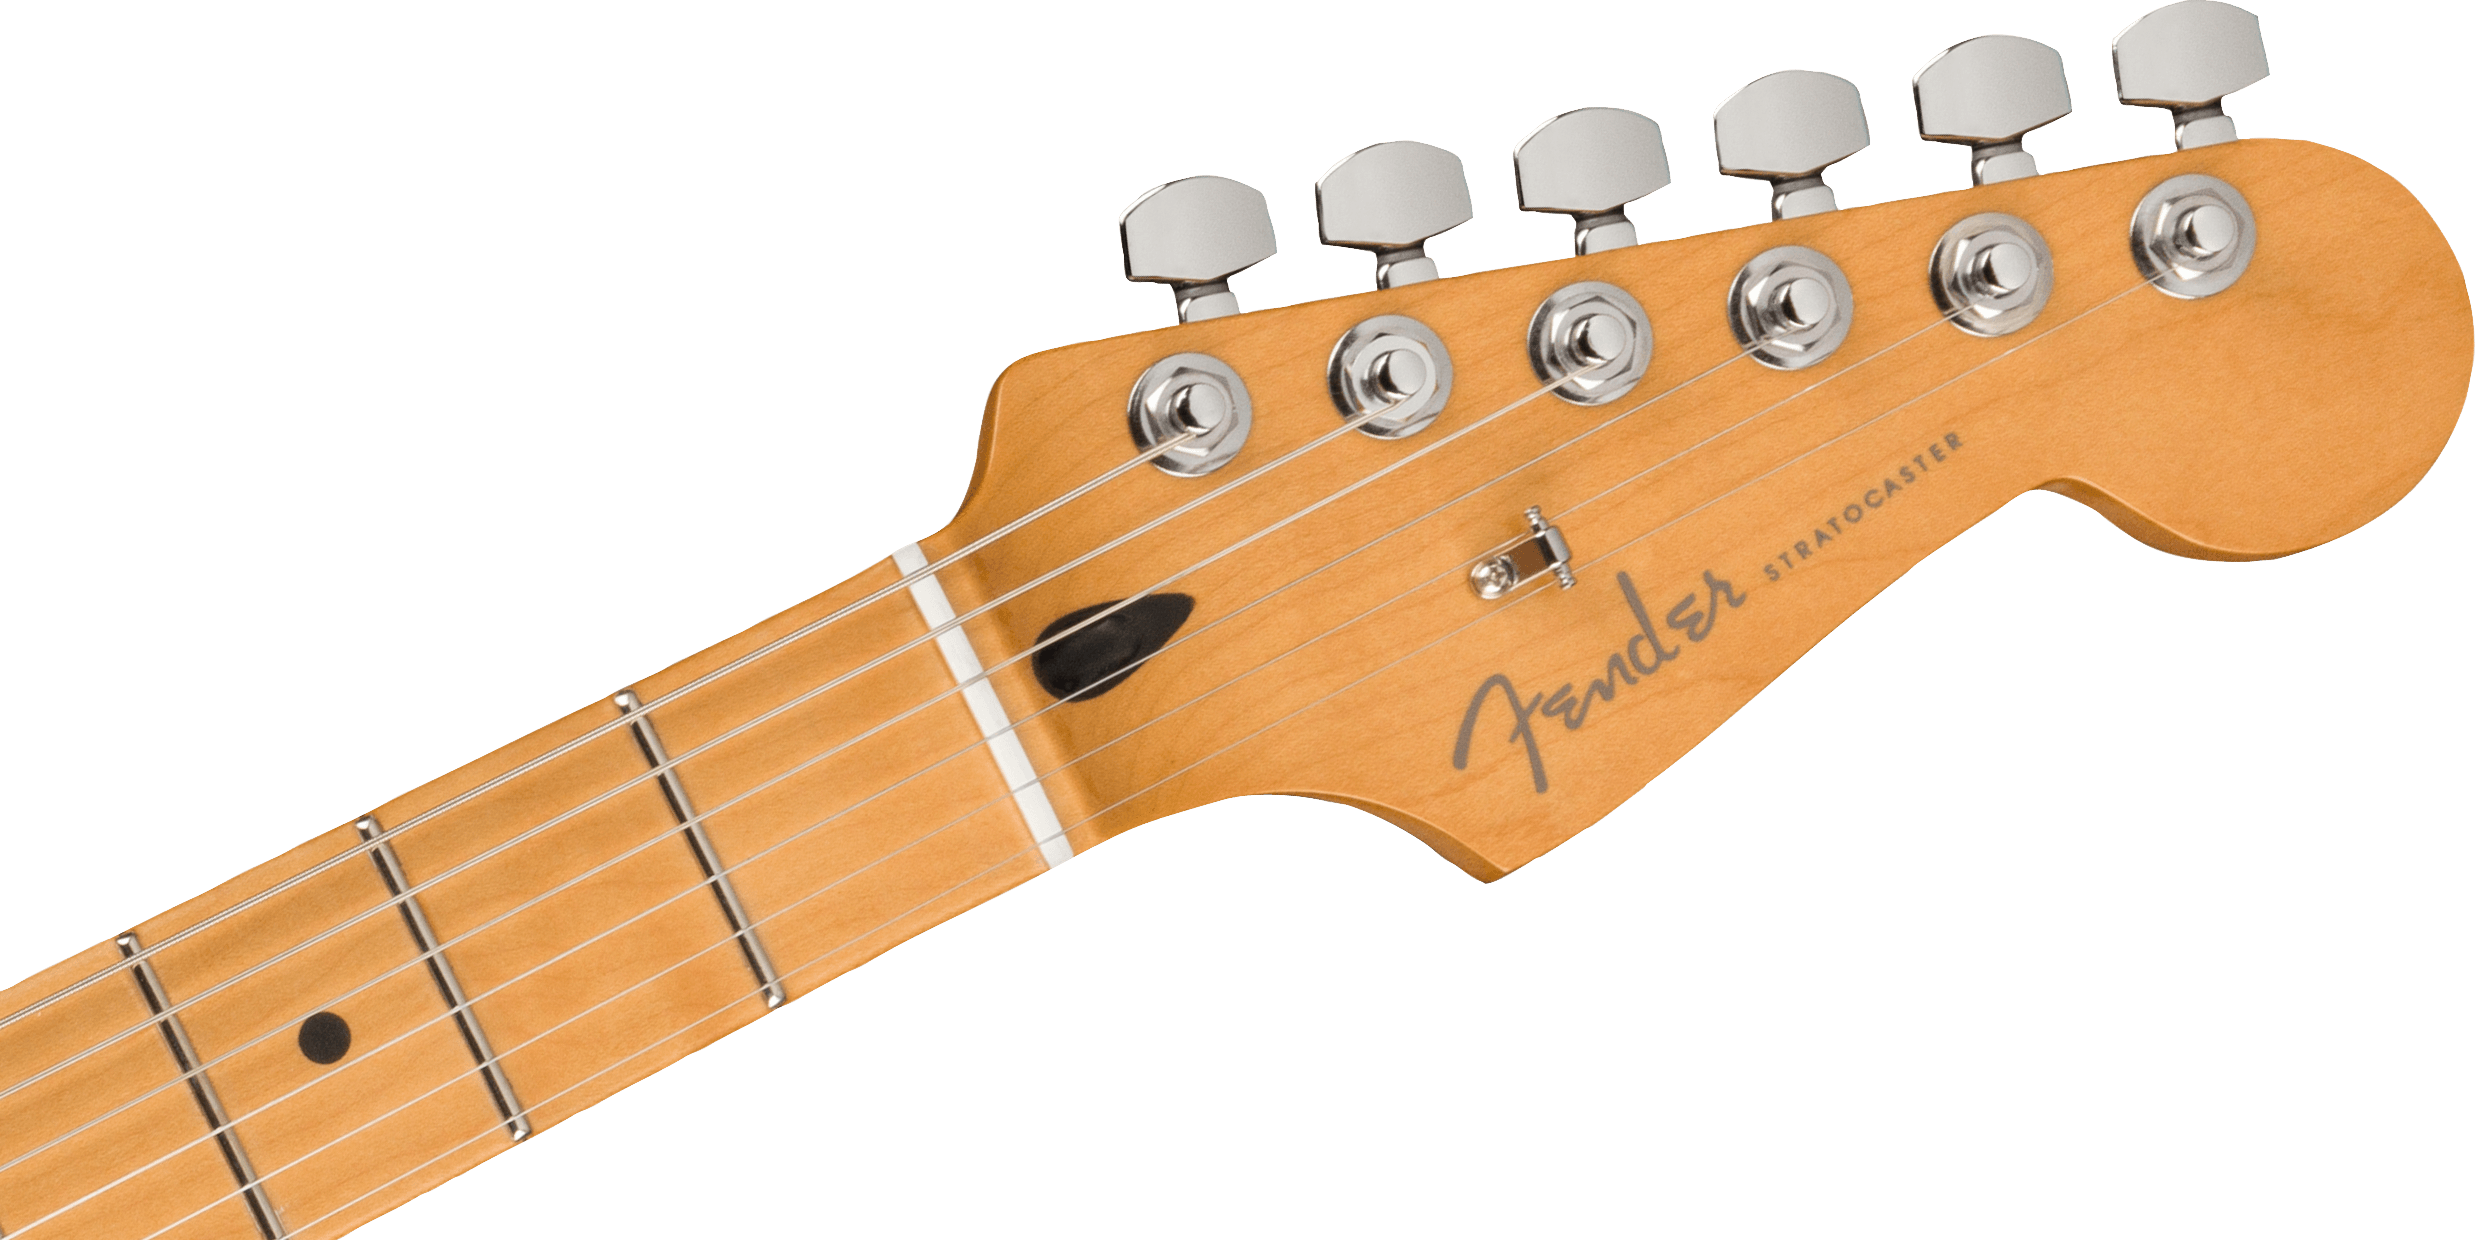 Fender Player Plus Stratocaster Electric Guitar in Olympic Pearl